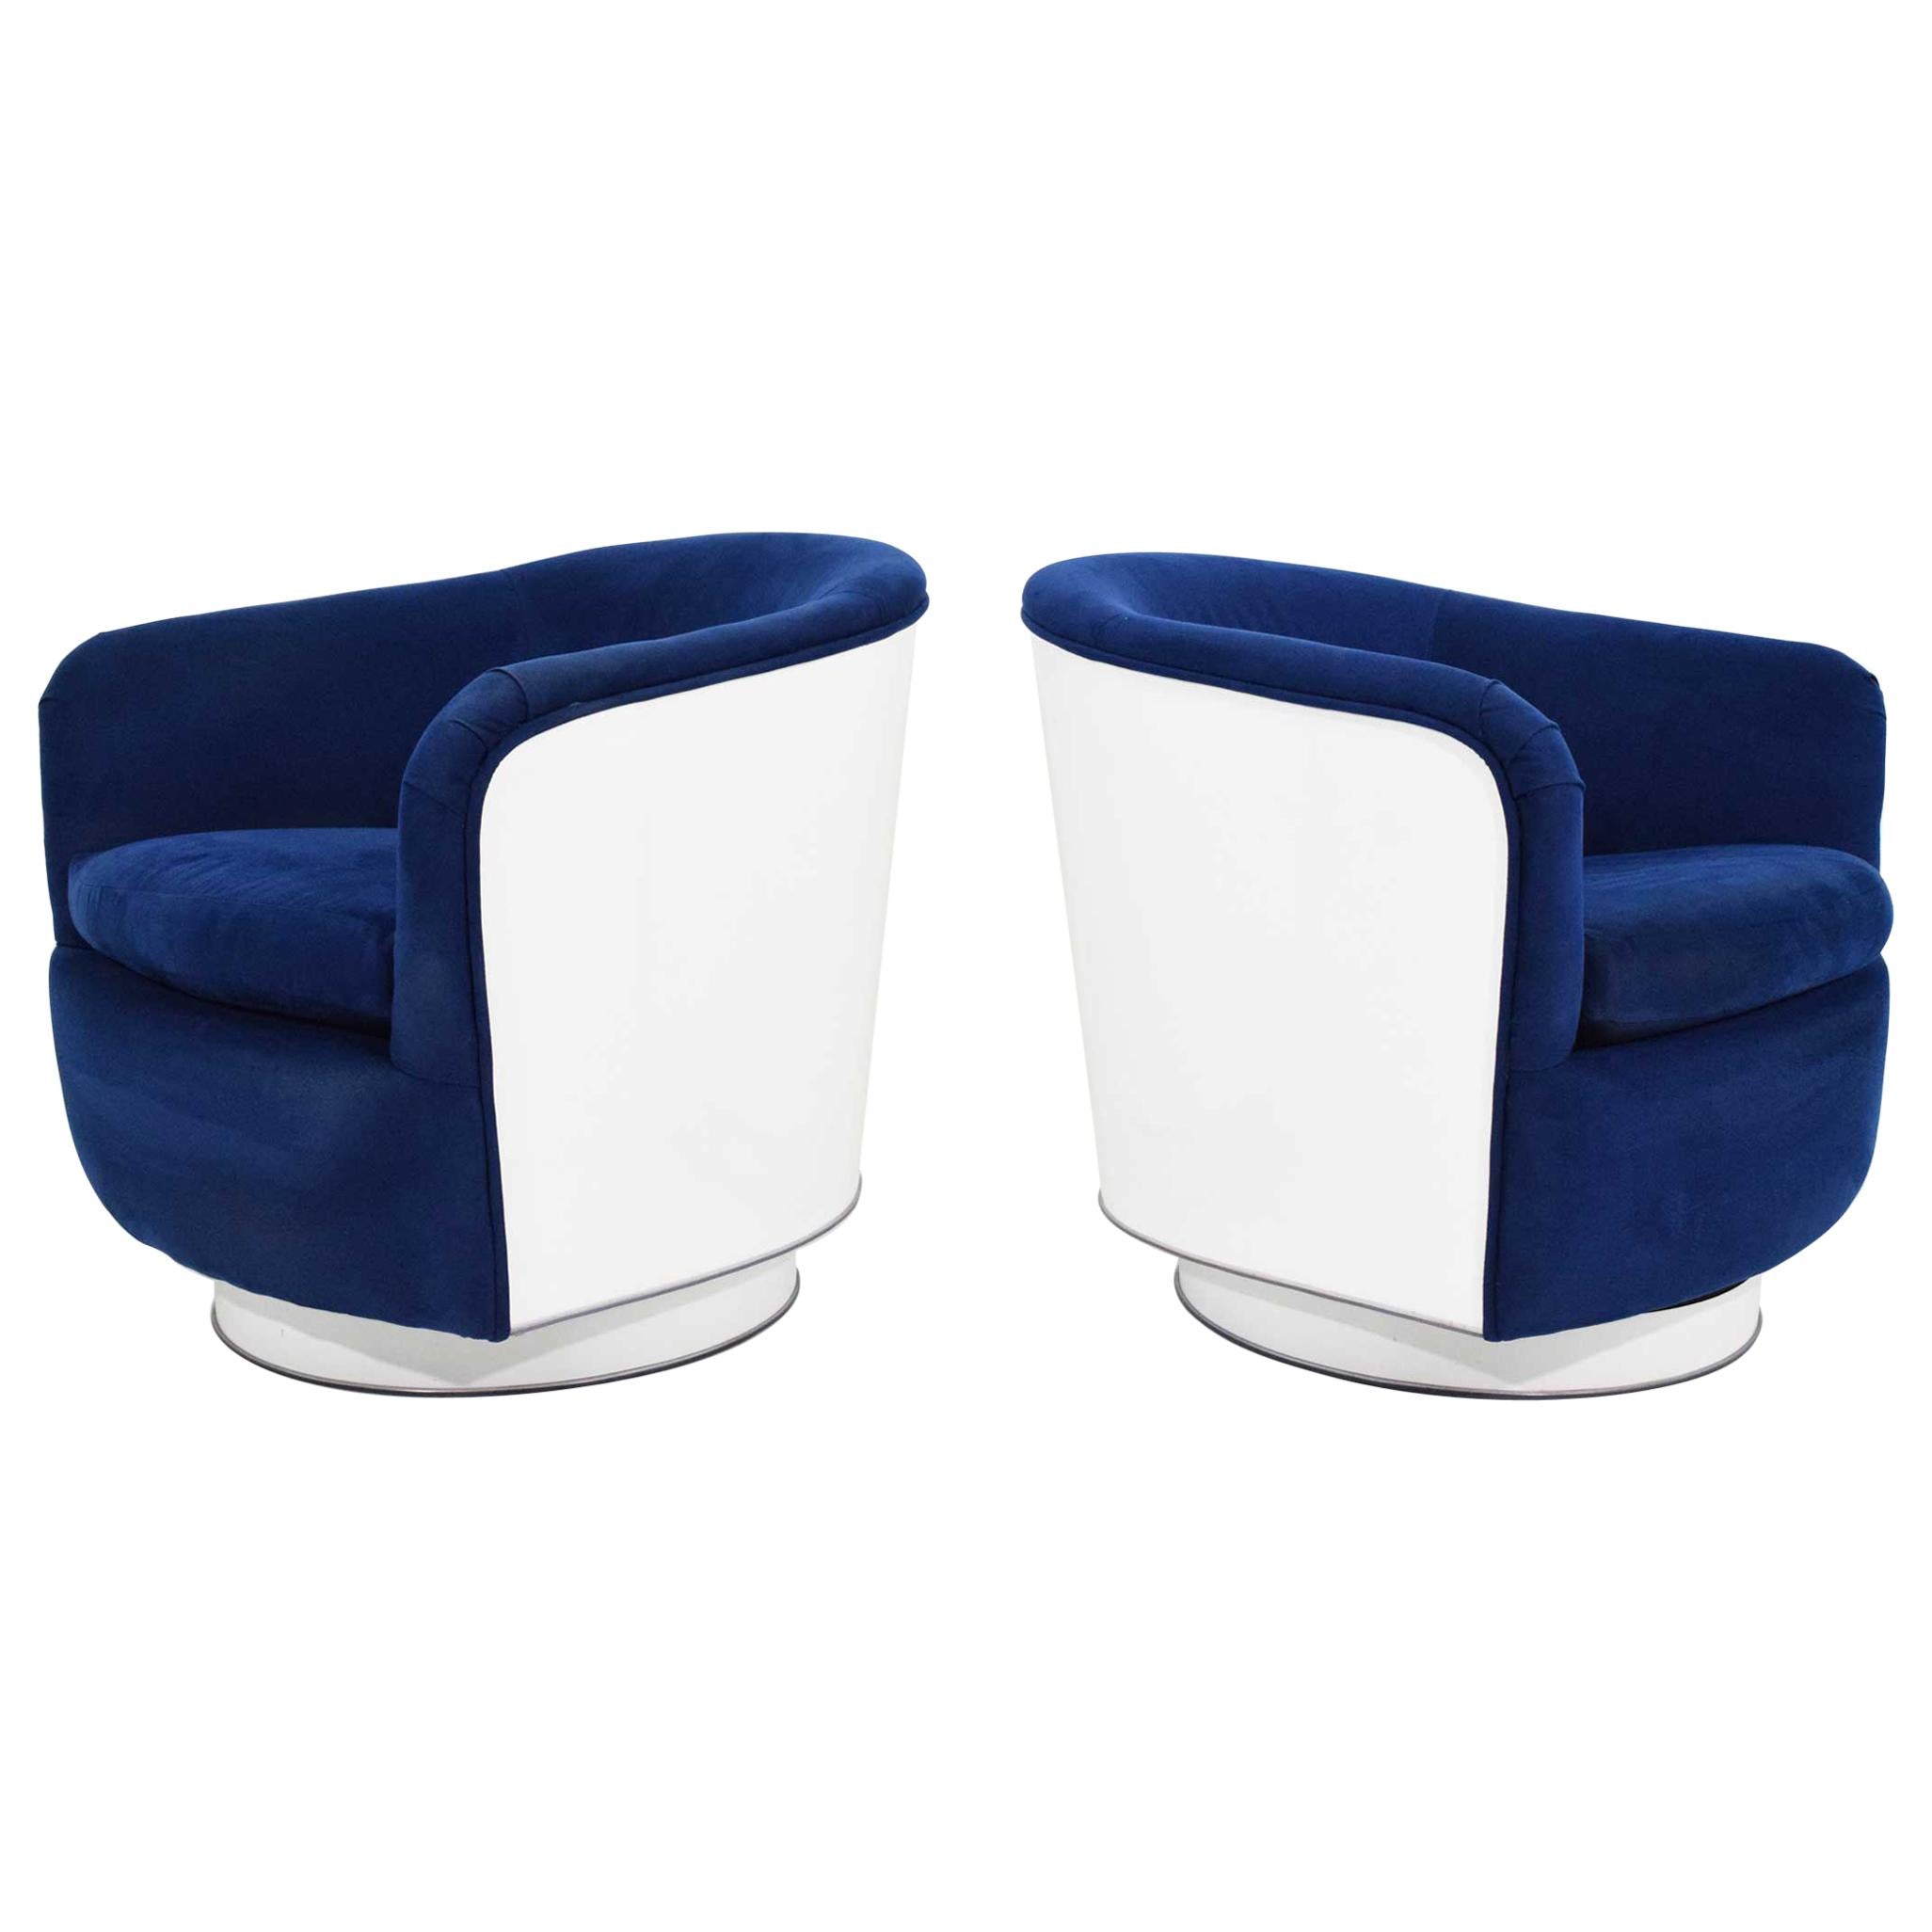 Pair of Milo Baughman Tilt/Swivel Lounge Chairs in Blue with White Lacquer